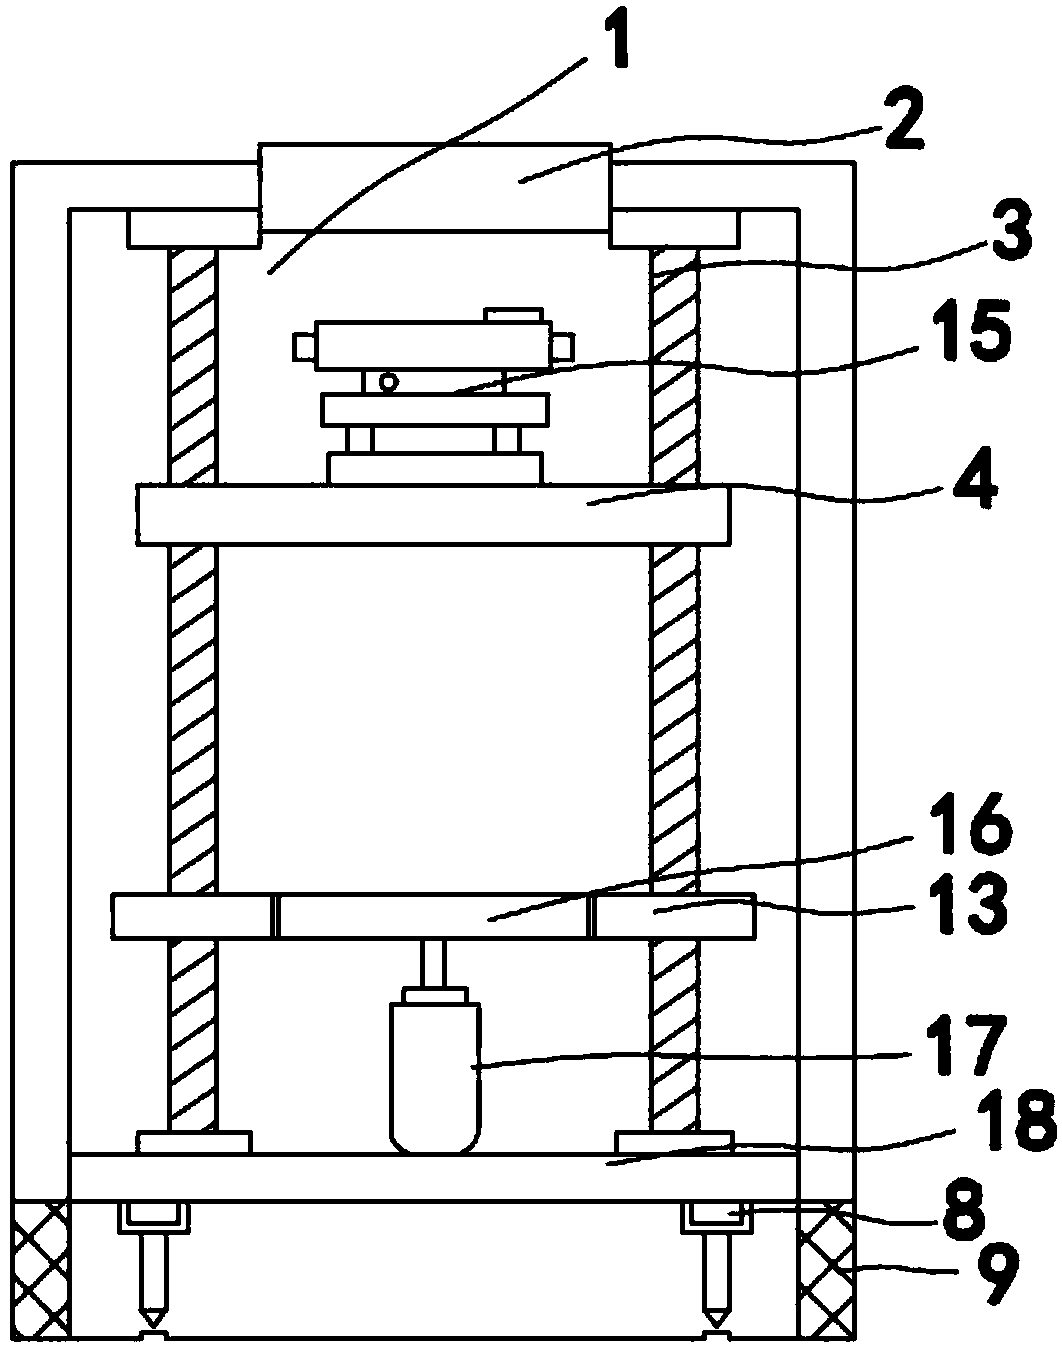 Device for measuring instrument in civil engineering